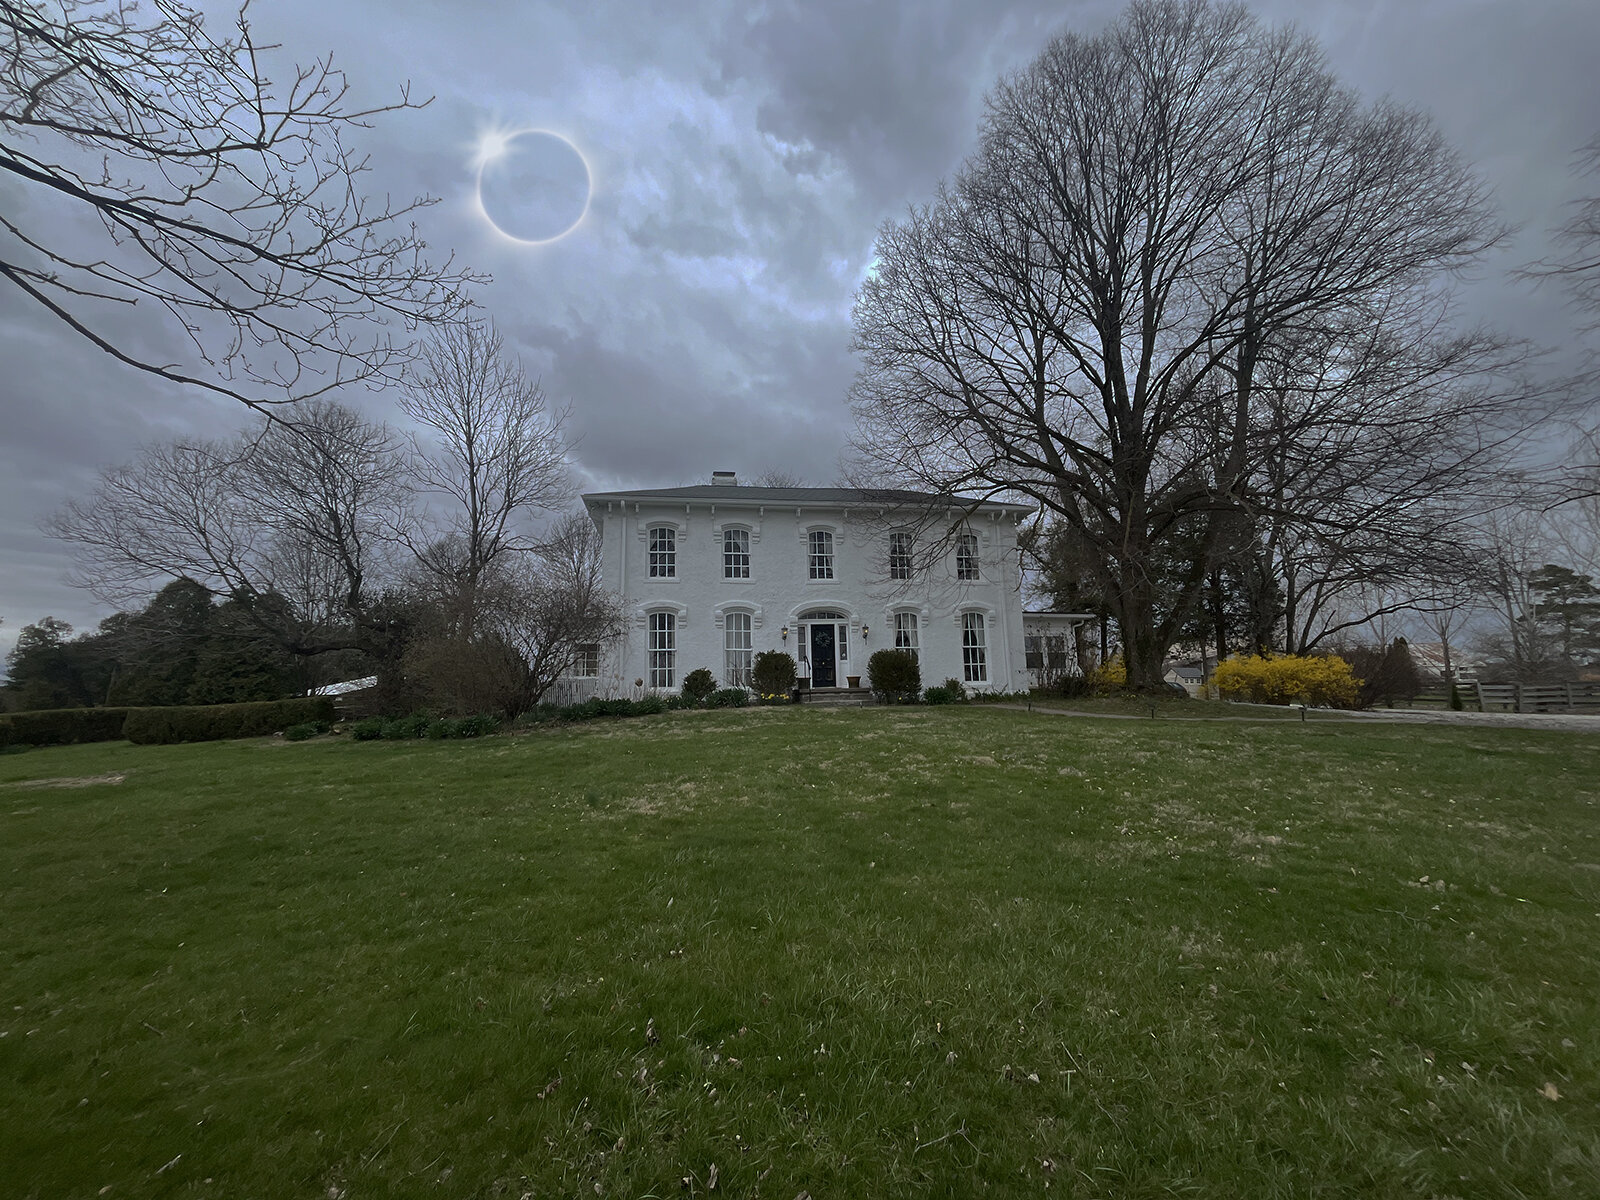 We had a cancellation for April 8th and the eclipse! We're offering noon check-in so you don't miss a thing. With an entire estate rental, we can accommodate up to 12 guests. Book on our website or via airbnb. https://bit.ly/eclipse-reservation

#air